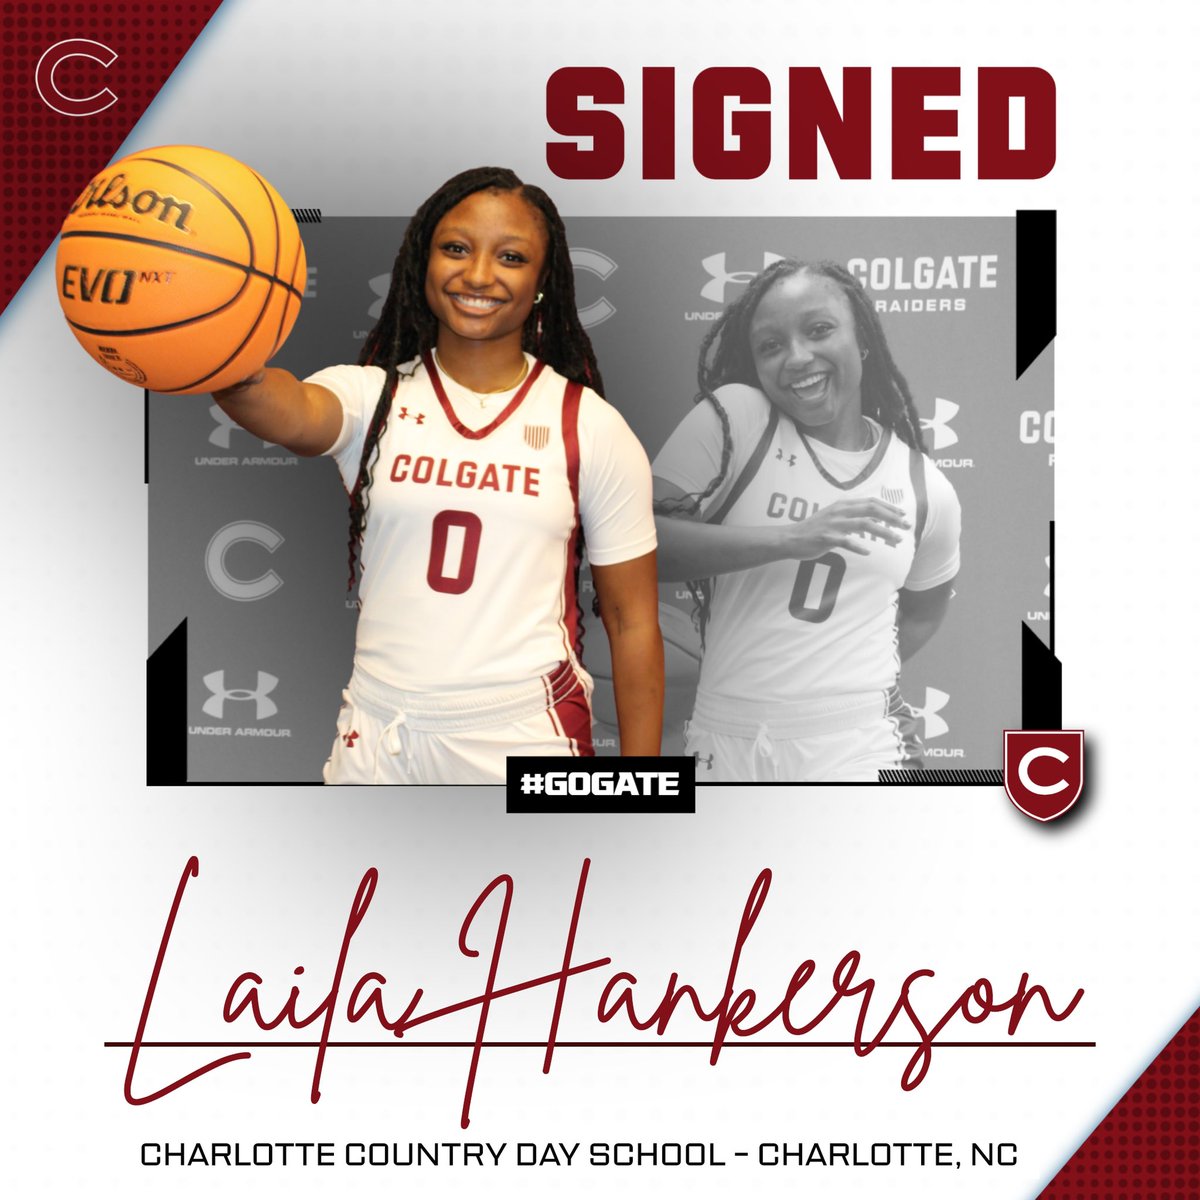 𝕊𝕚𝕘𝕟𝕖𝕕 | 𝕃𝕒𝕚𝕝𝕒 ℍ𝕒𝕟𝕜𝕖𝕣𝕤𝕠𝕟 Welcome to the family @HankersonLaila ! Can’t wait to get to work! #GoGate